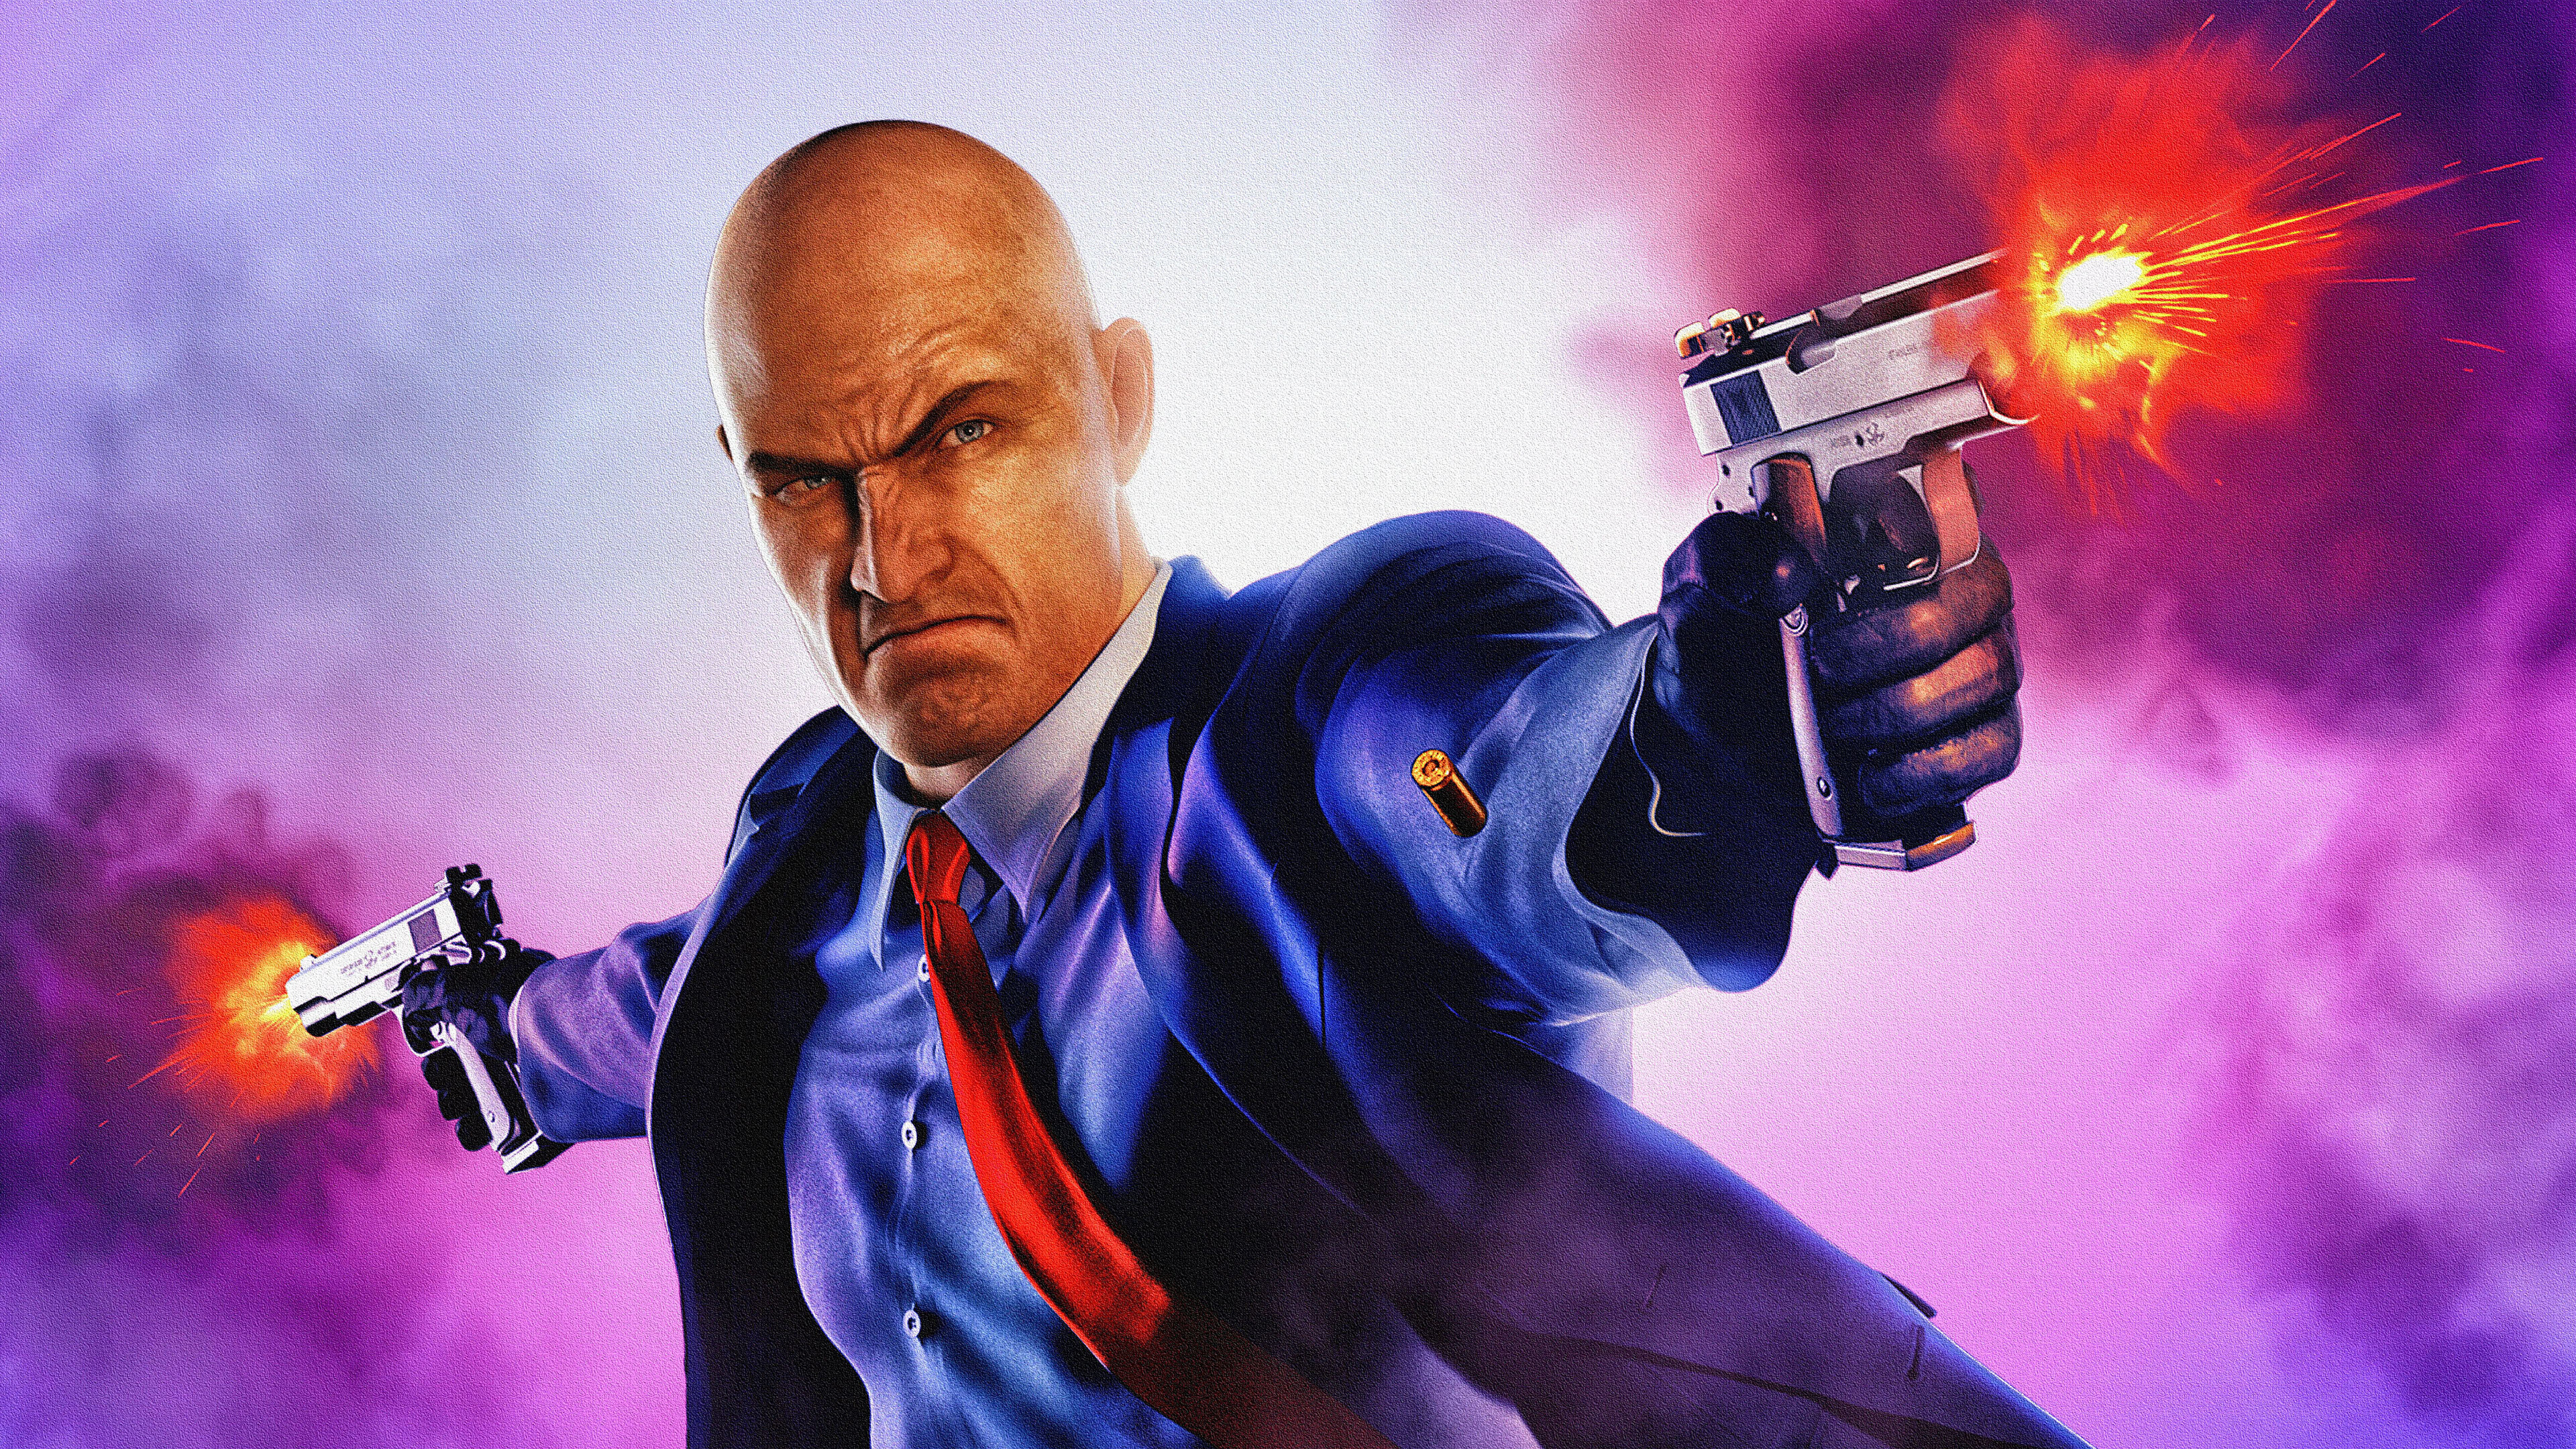 Hitman 2020 game 4K HD wallpapers, Stunning graphics, Detailed environments, Action-packed gameplay, 3840x2160 4K Desktop